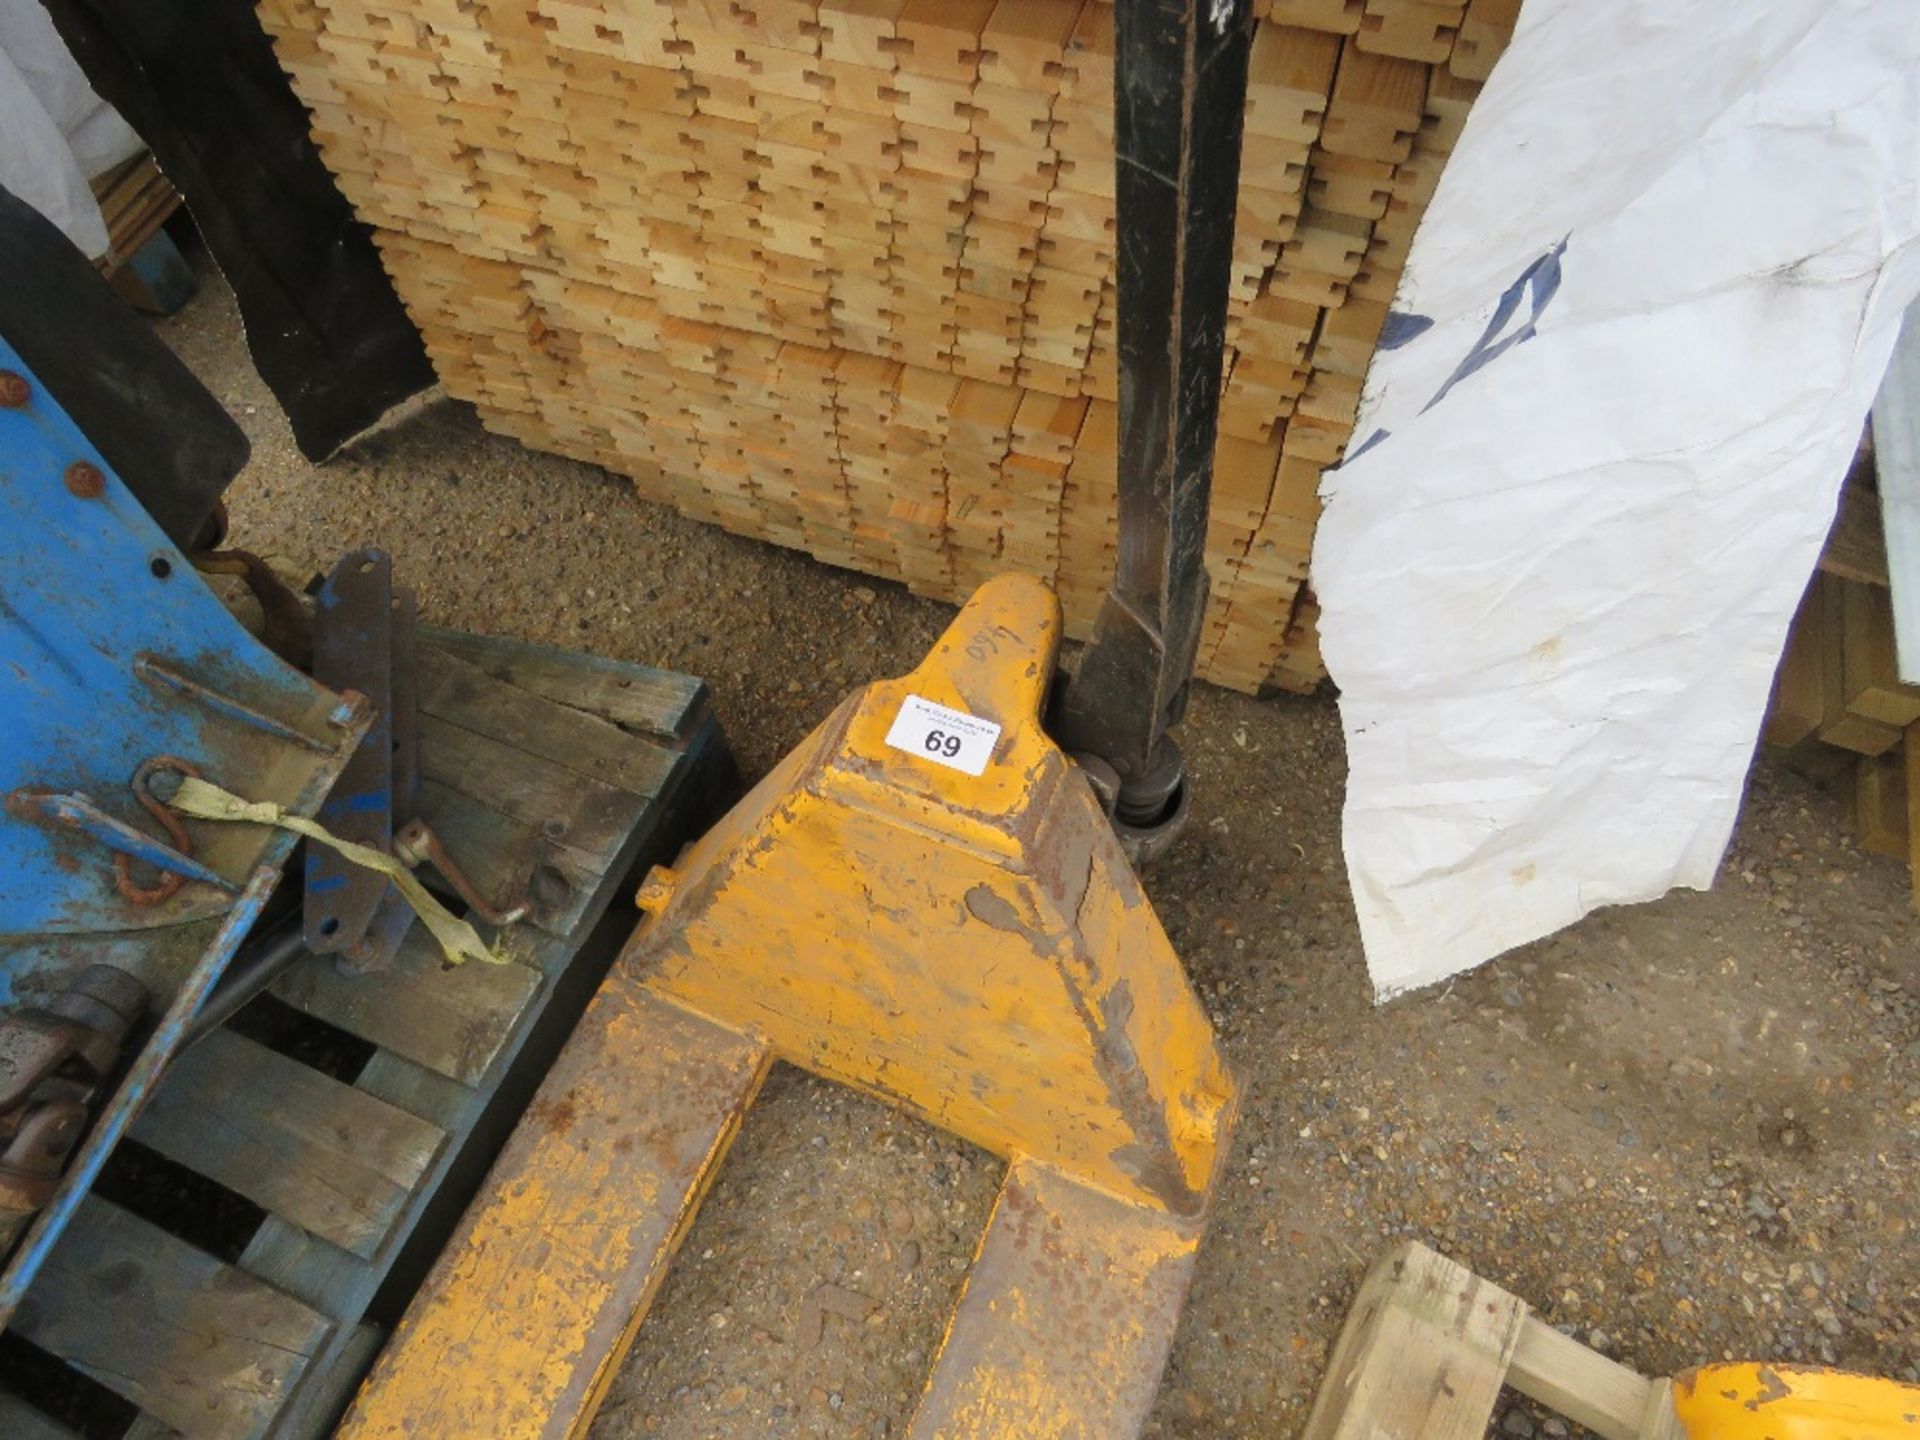 HYDRAULIC PALLET TRUCK. WHEN TESTED WAS SEEN TO LIFT AND LOWER. - Image 2 of 3